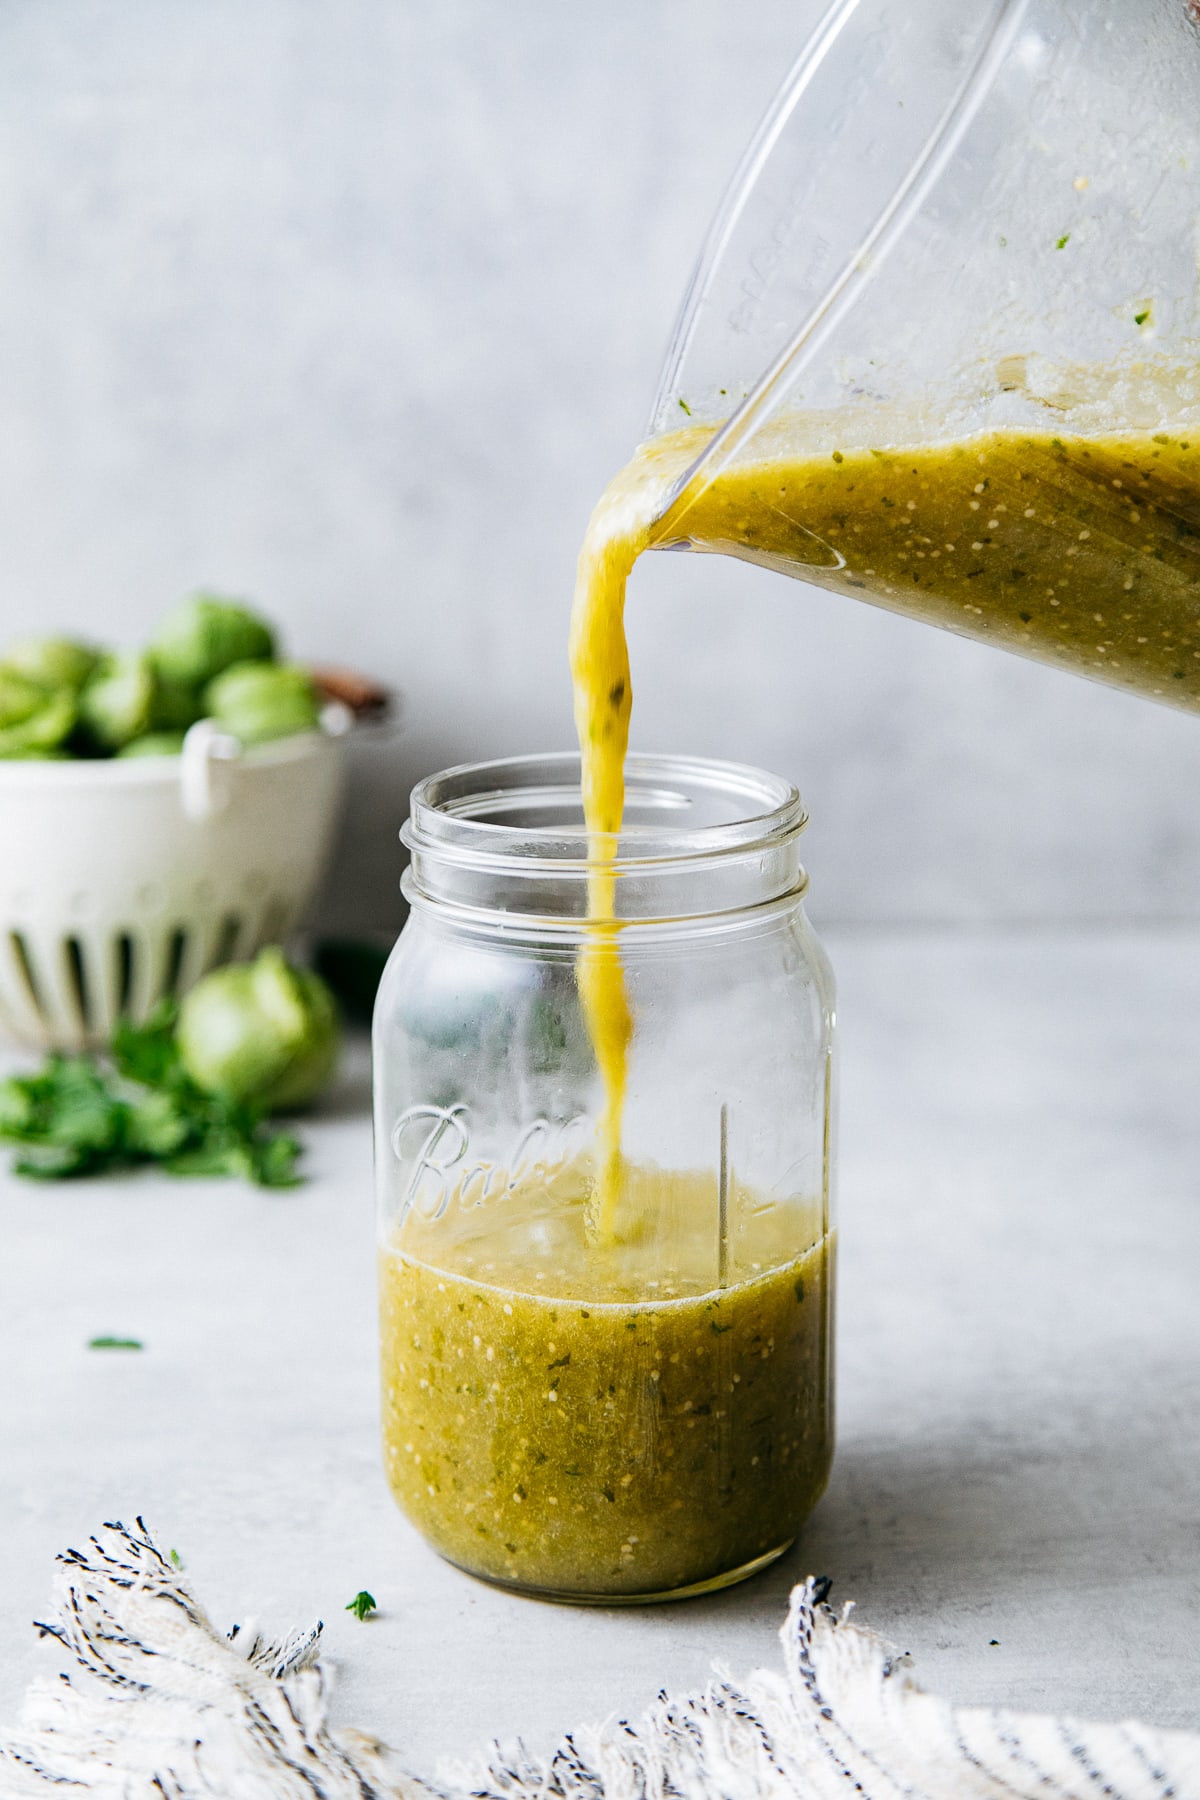 head on view of verde sauce being poured into a glass jar with items in the background.